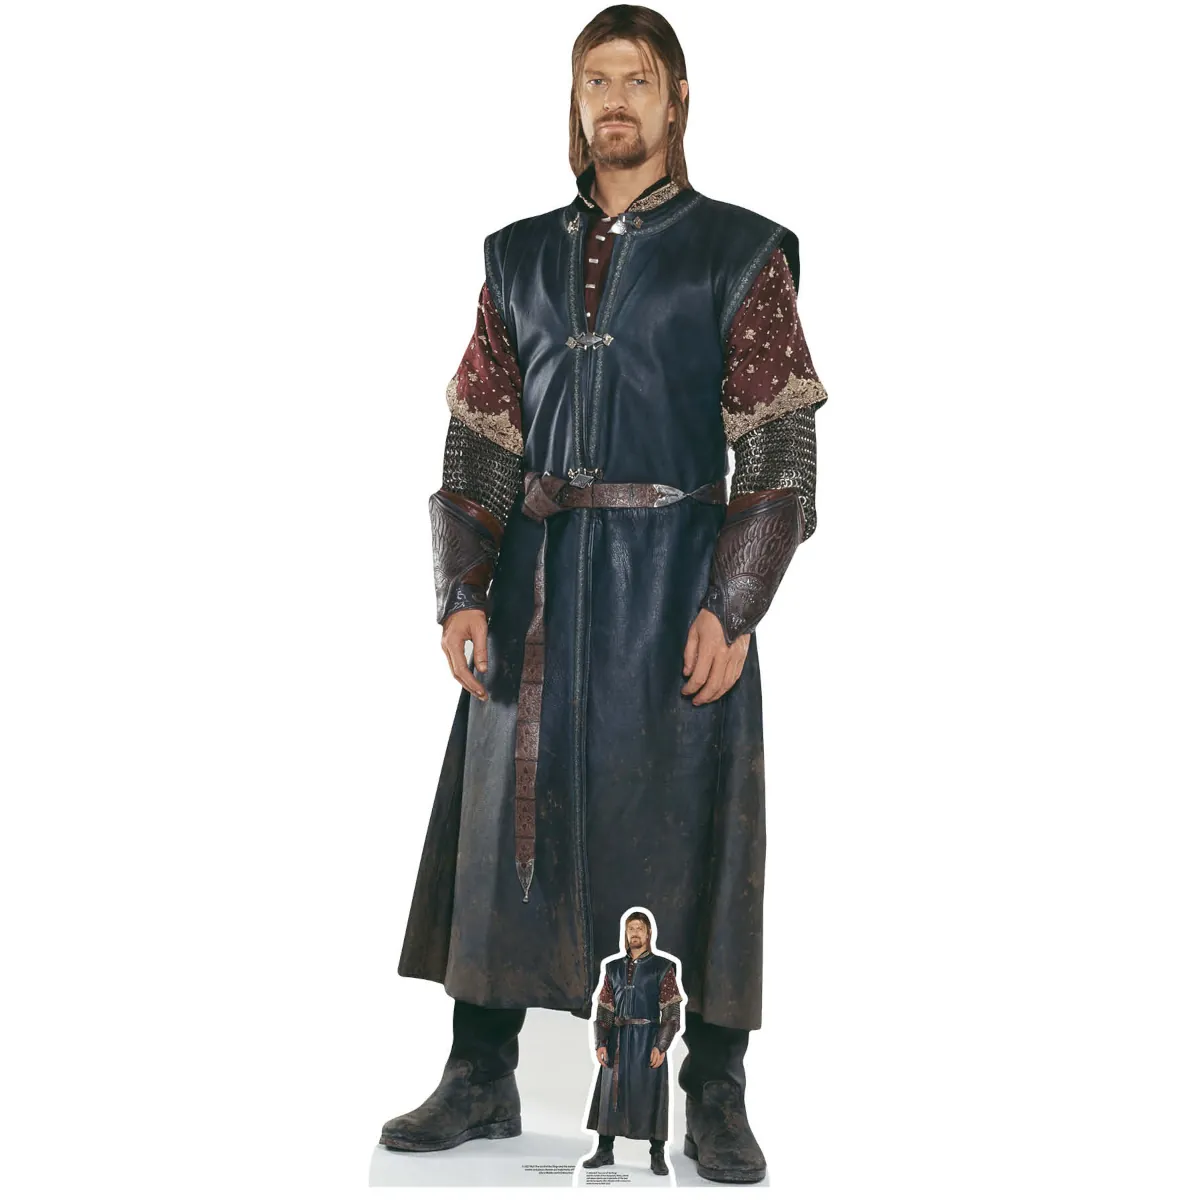 SC4133 Boromir (The Lord of the Rings) Official Lifesize + Mini Cardboard Cutout Standee Front